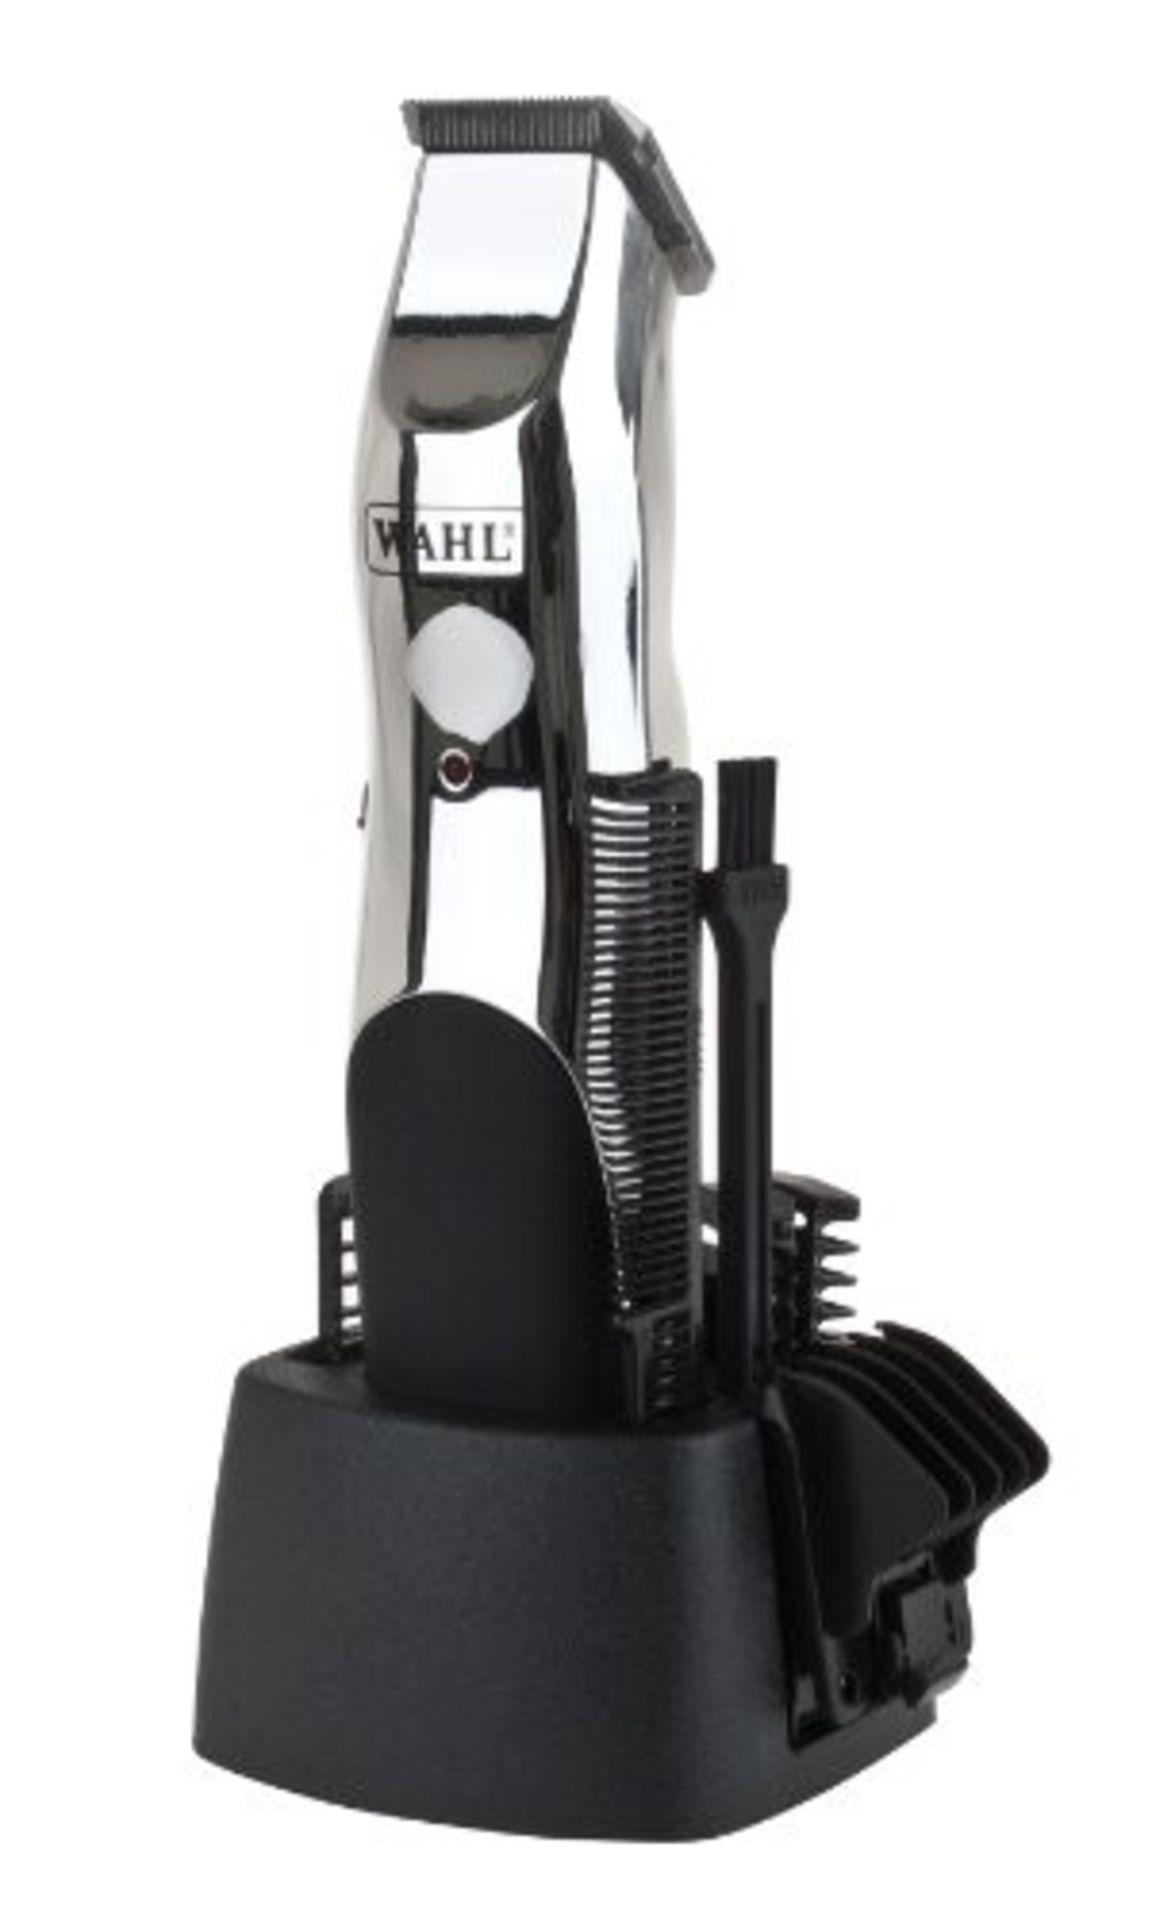 COMBINED RRP £118.00 LOT TO CONTAIN 8 ASSORTED Personal Care Appliances: GroomEase, Wahl, Wahl, - Image 9 of 9